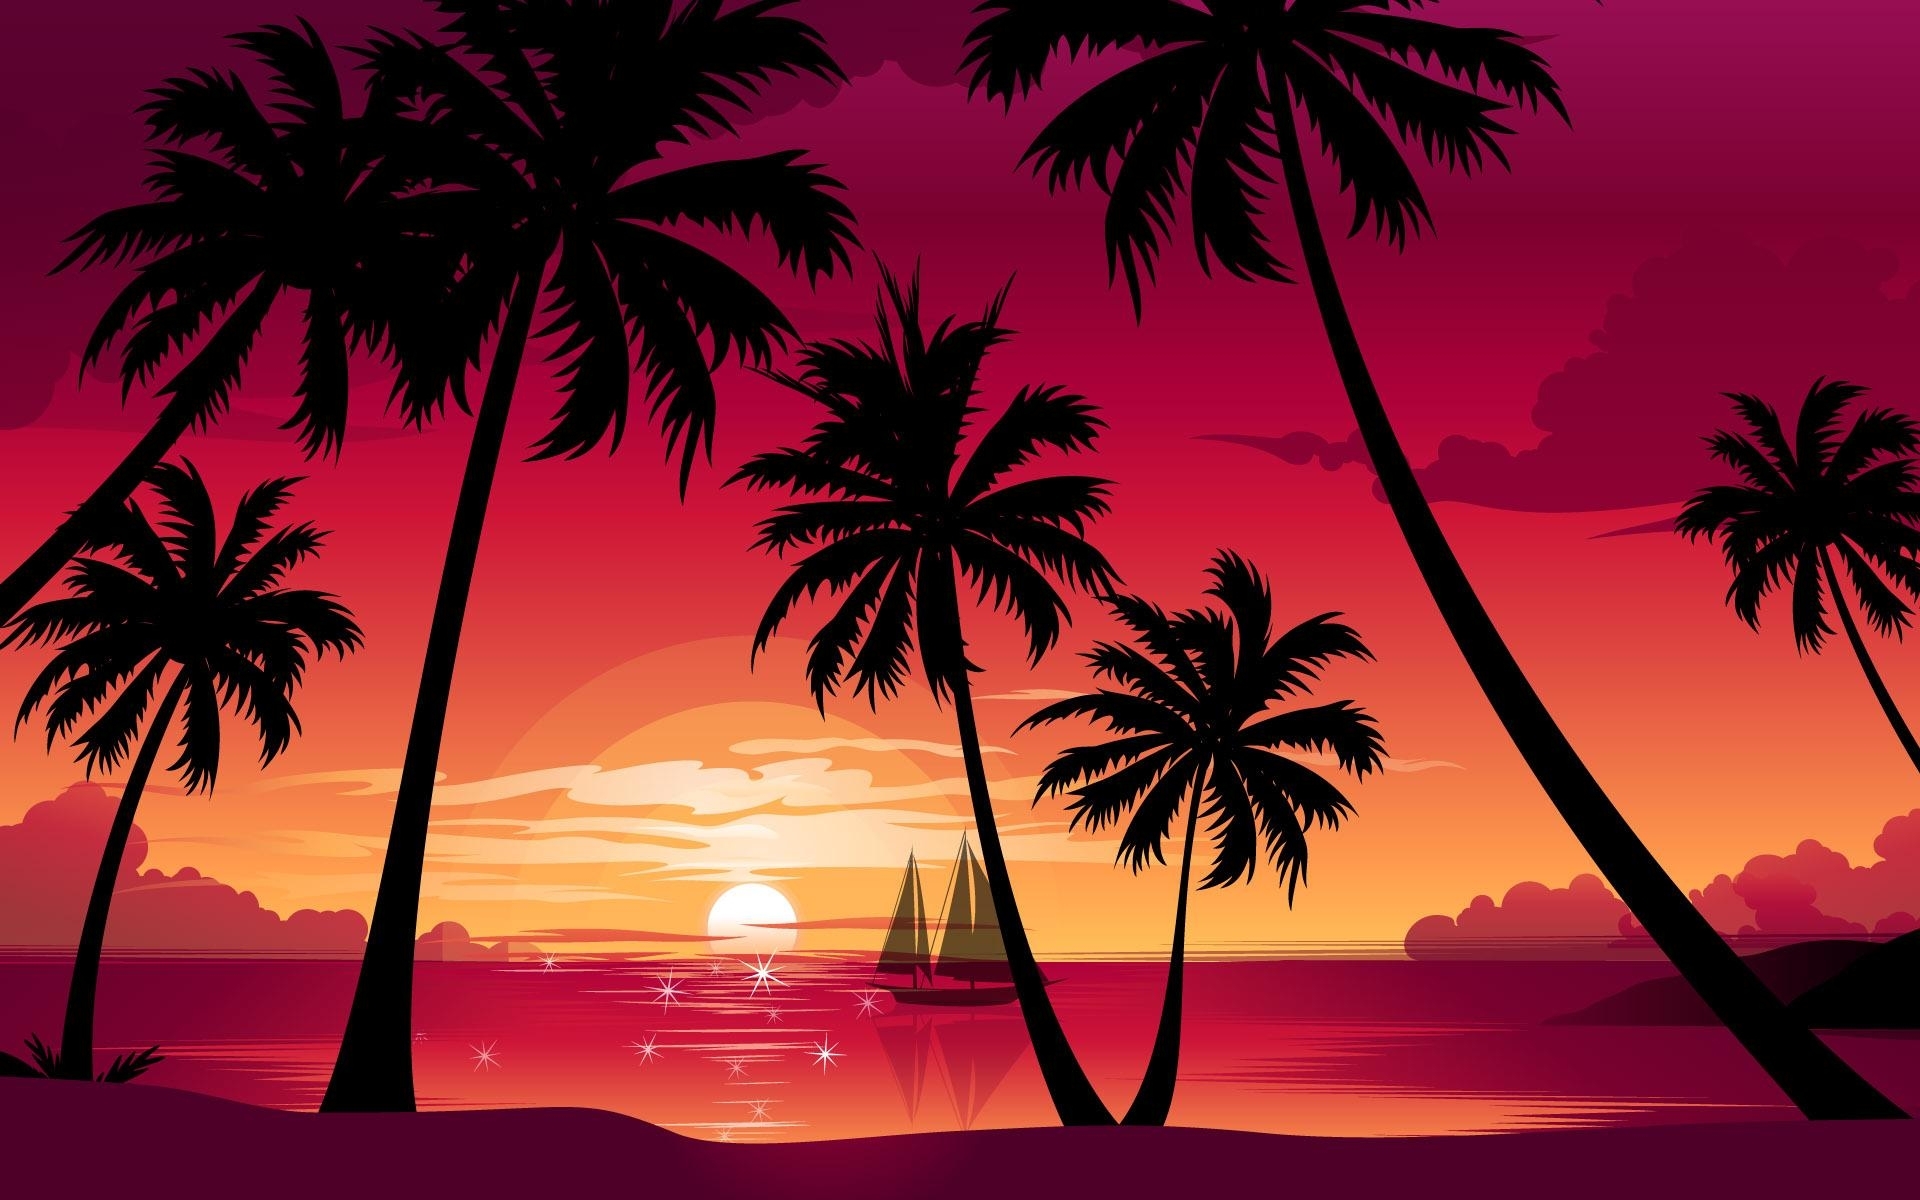 pictures, palms, sunset, red, landscape UHD